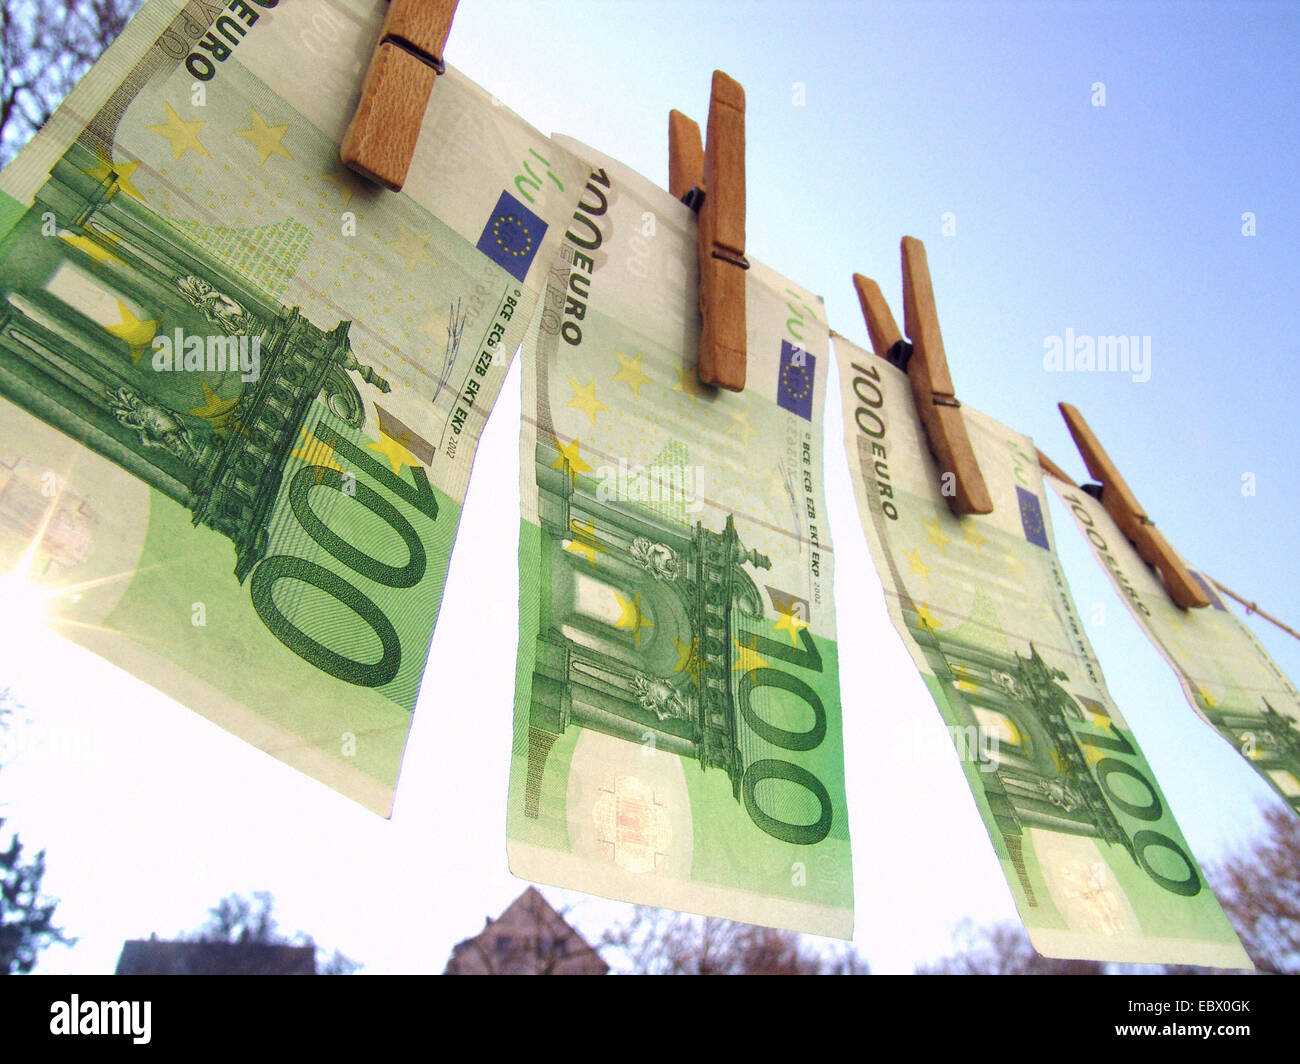 symbolic picture money laundering, bank notes on a clothesline Stock Photo